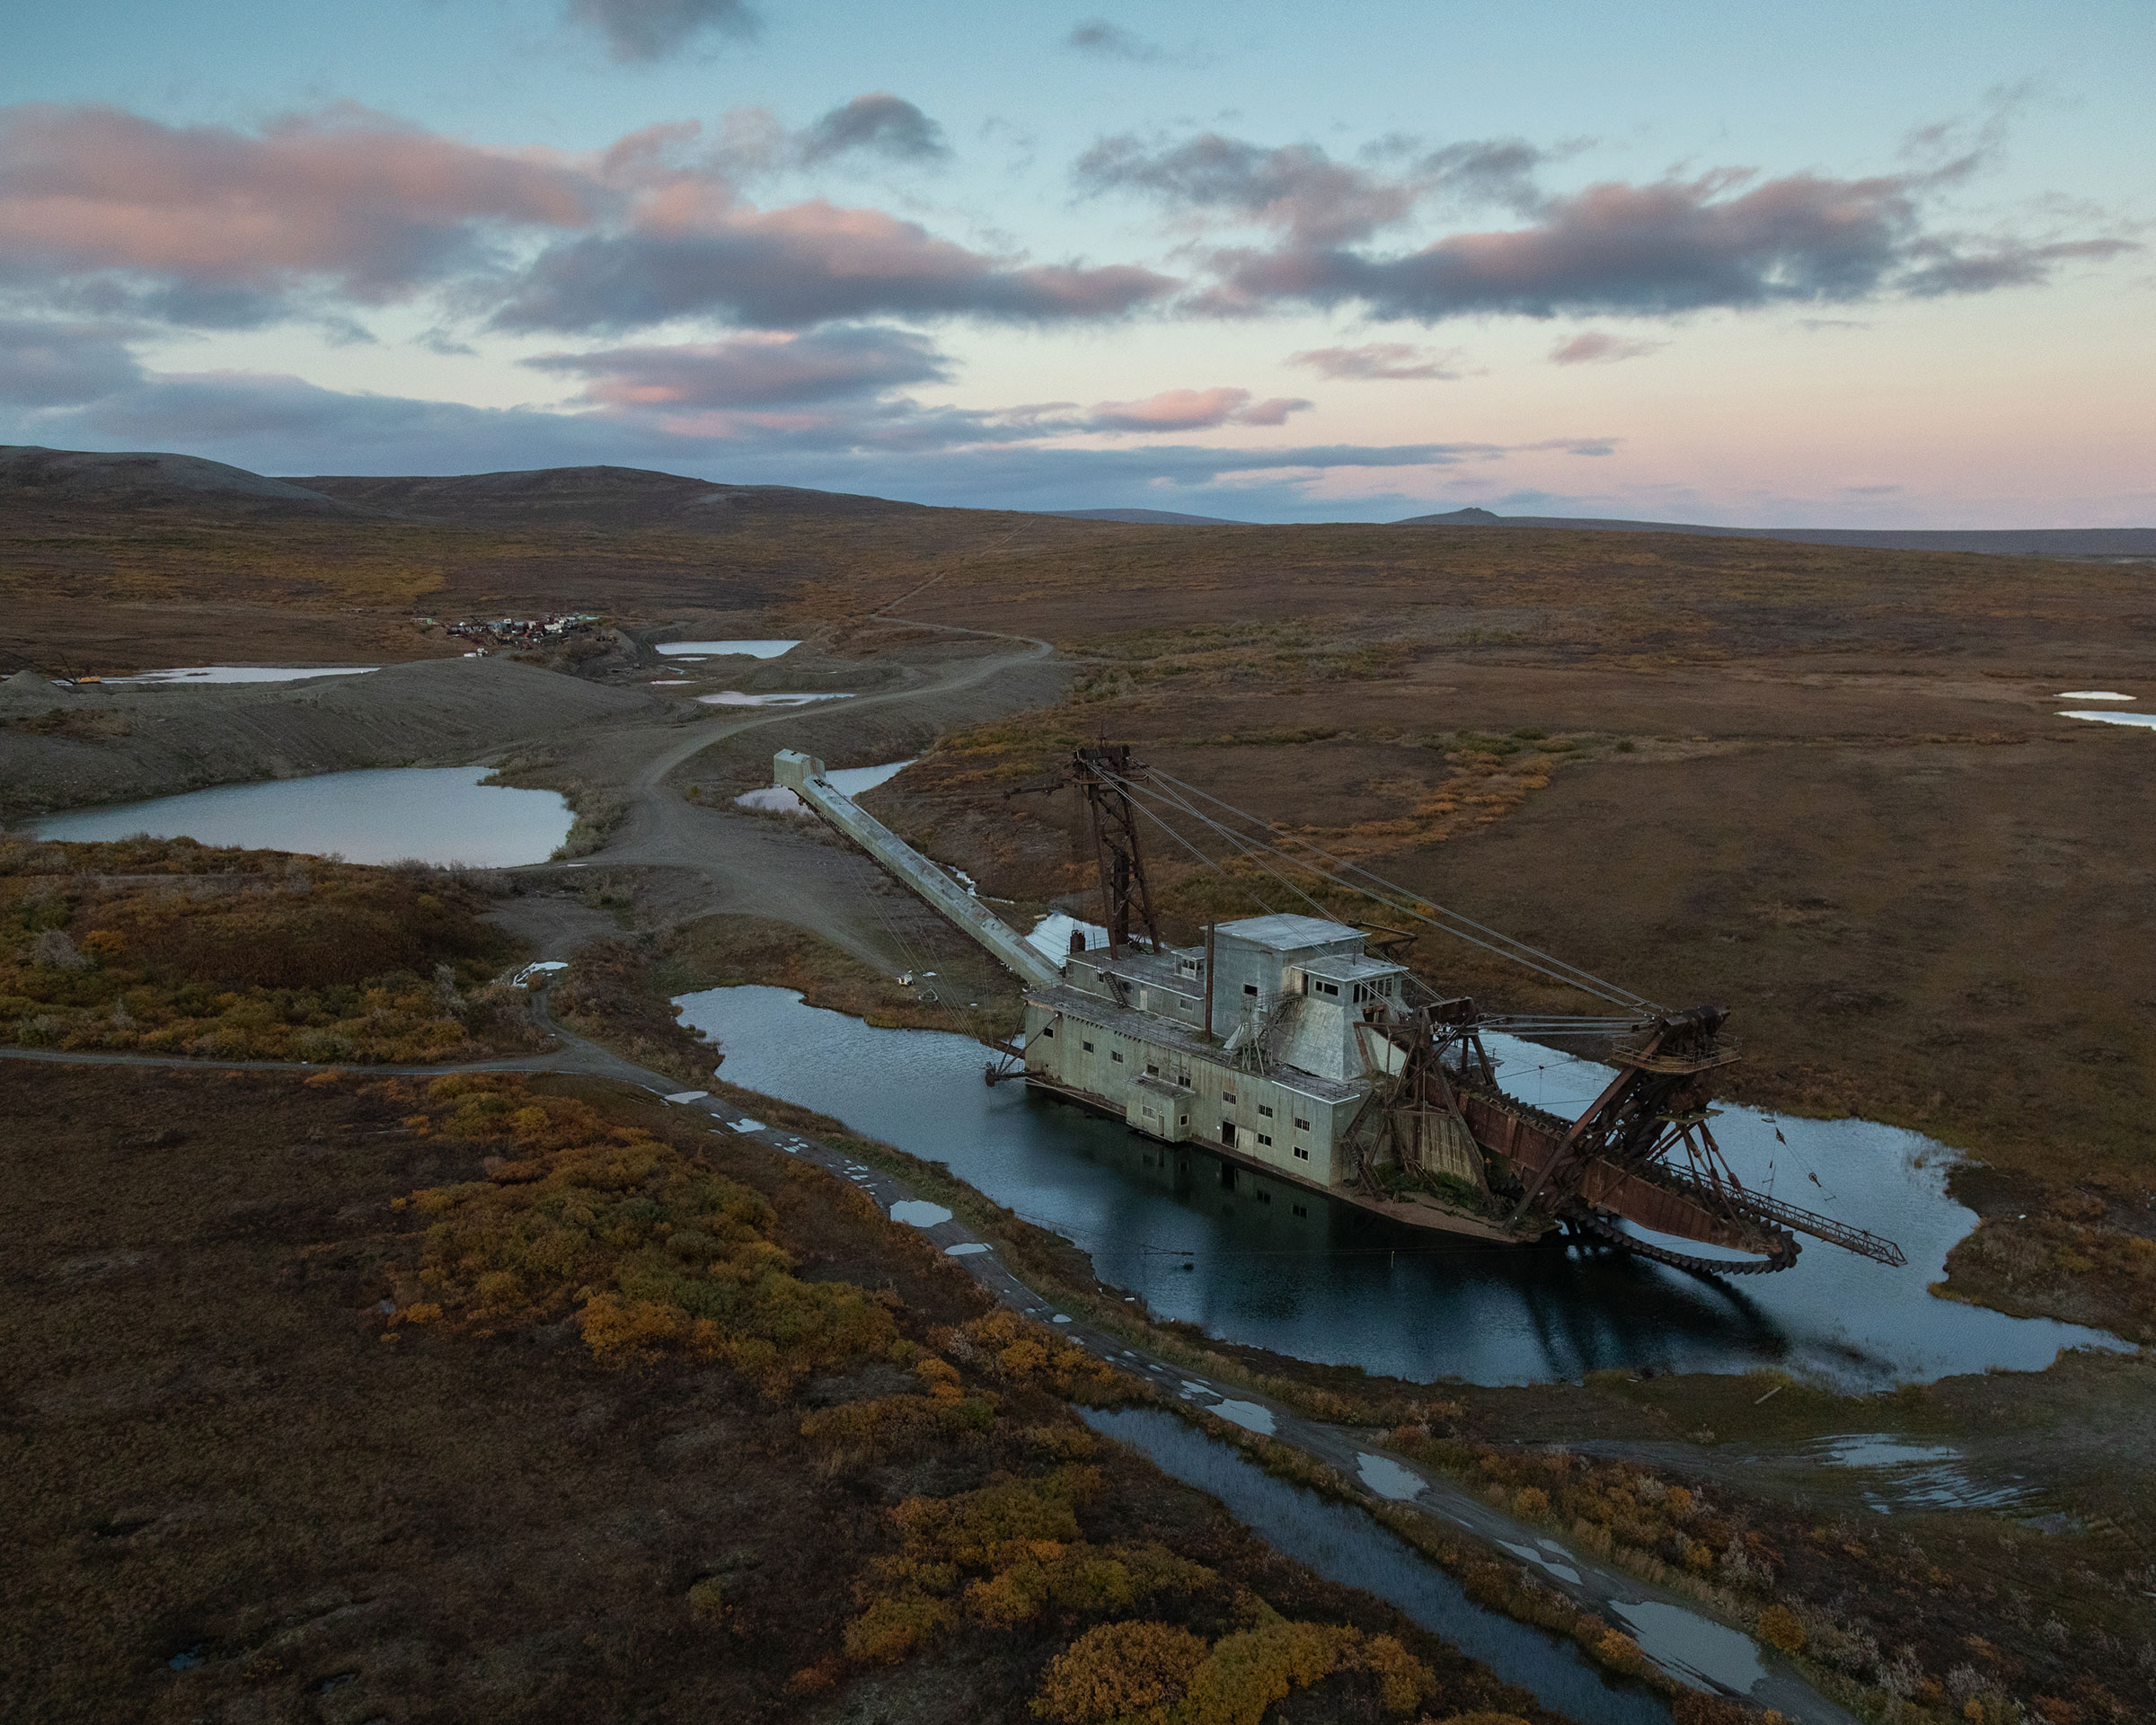 An abandoned gold dredger sits in the tundra behind Nome, Alaska. The present-day city of Nome was established as a result of the gold rush that brought thousands of prospectors in the early 1900s. (Acacia Johnson for TIME)